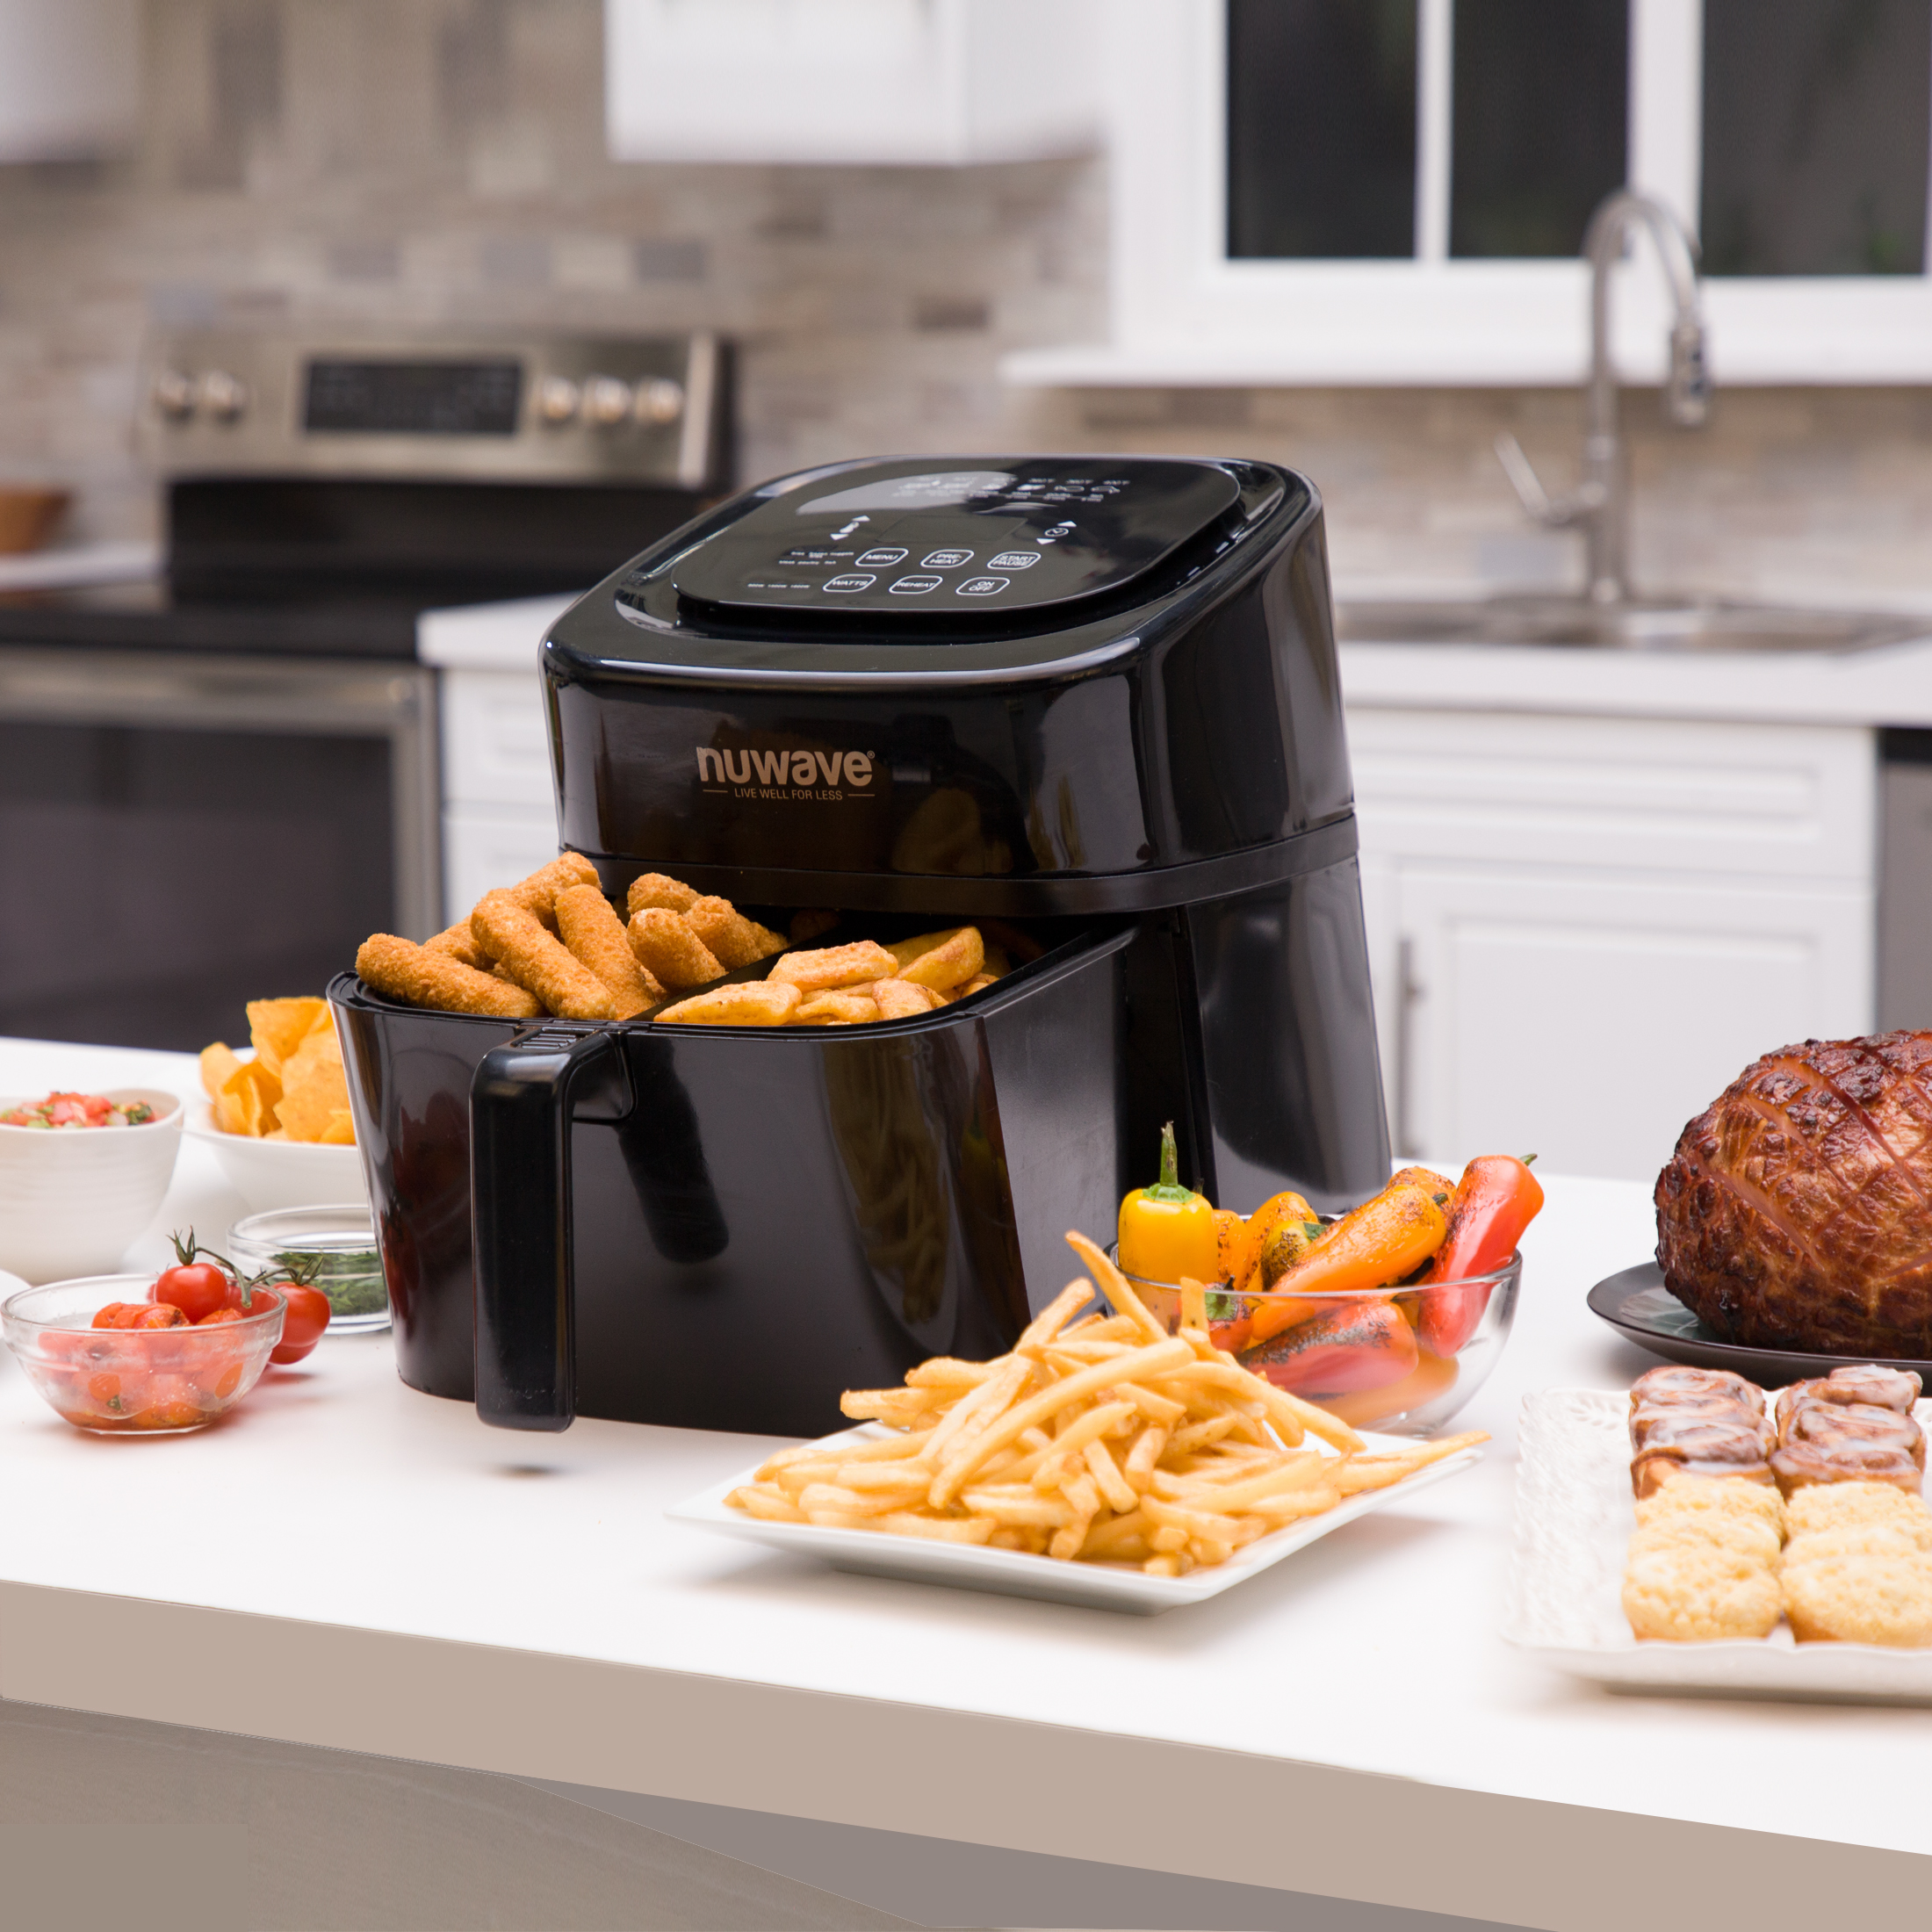 NuWave Brio 6-Quart Digital Air Fryer with One-Touch Digital Controls, Automatic Shutoff, Stainless Steel - image 5 of 11